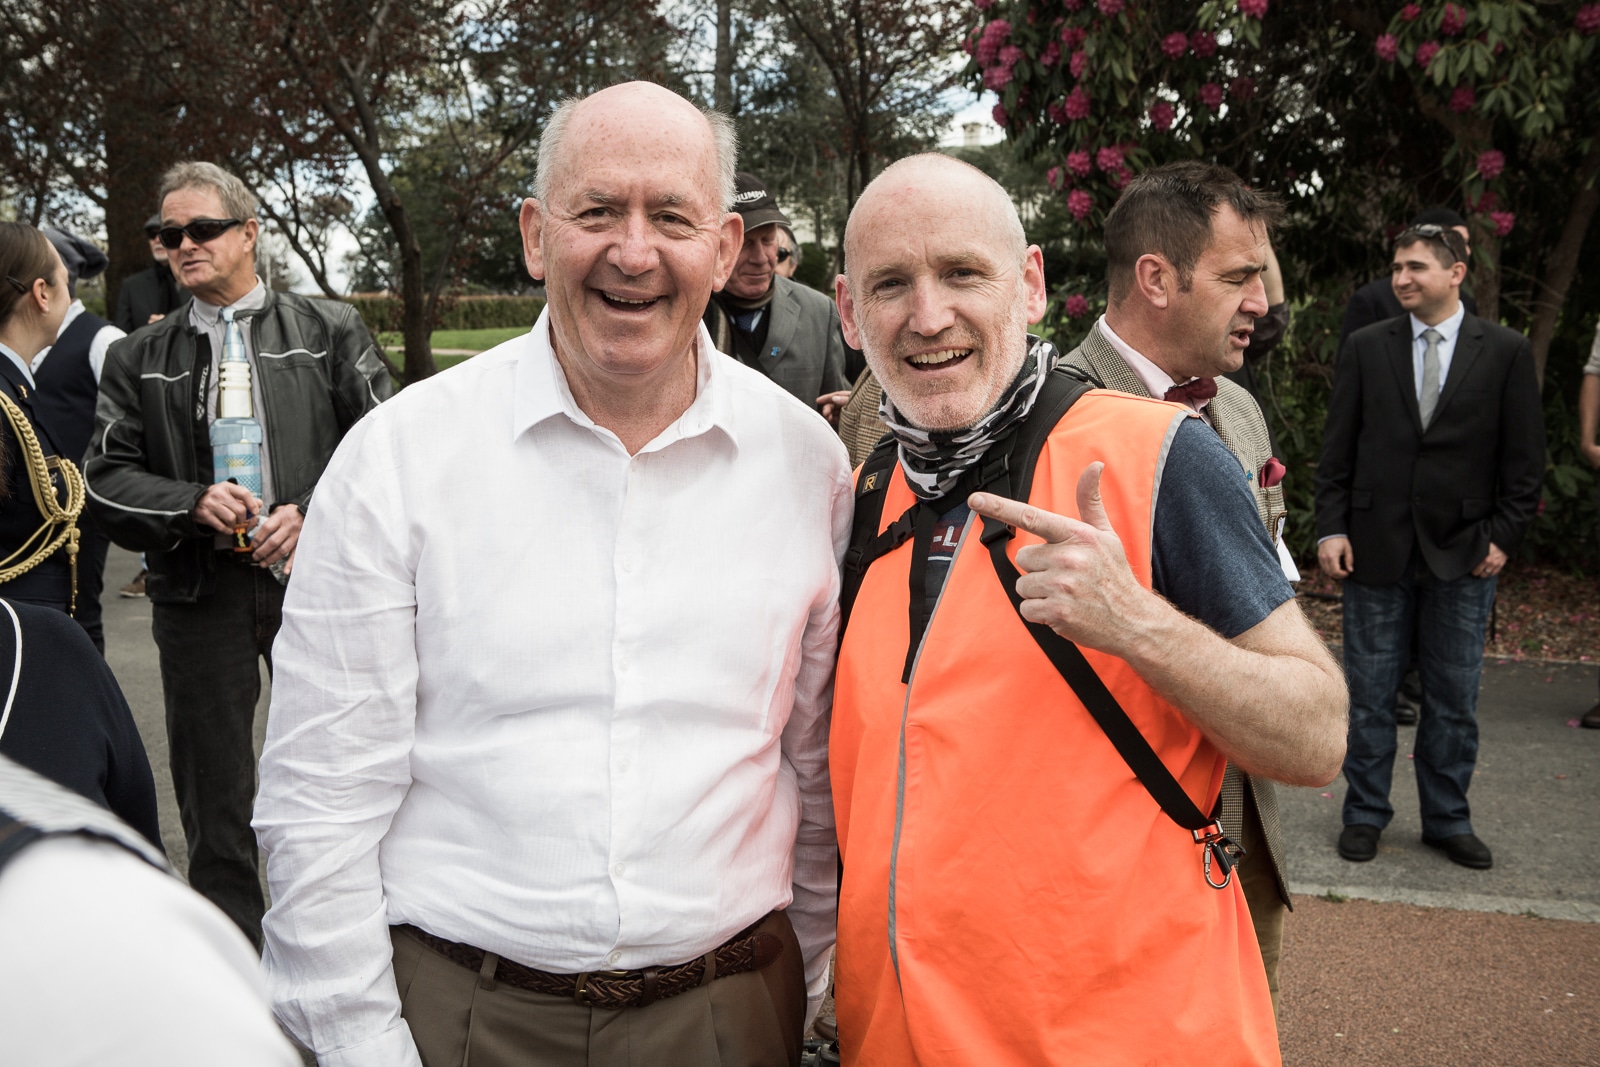 His Excellency, General the Honourable Sir Peter Cosgrove AK MC (Retd) taking time out to get a photo with your truly. 